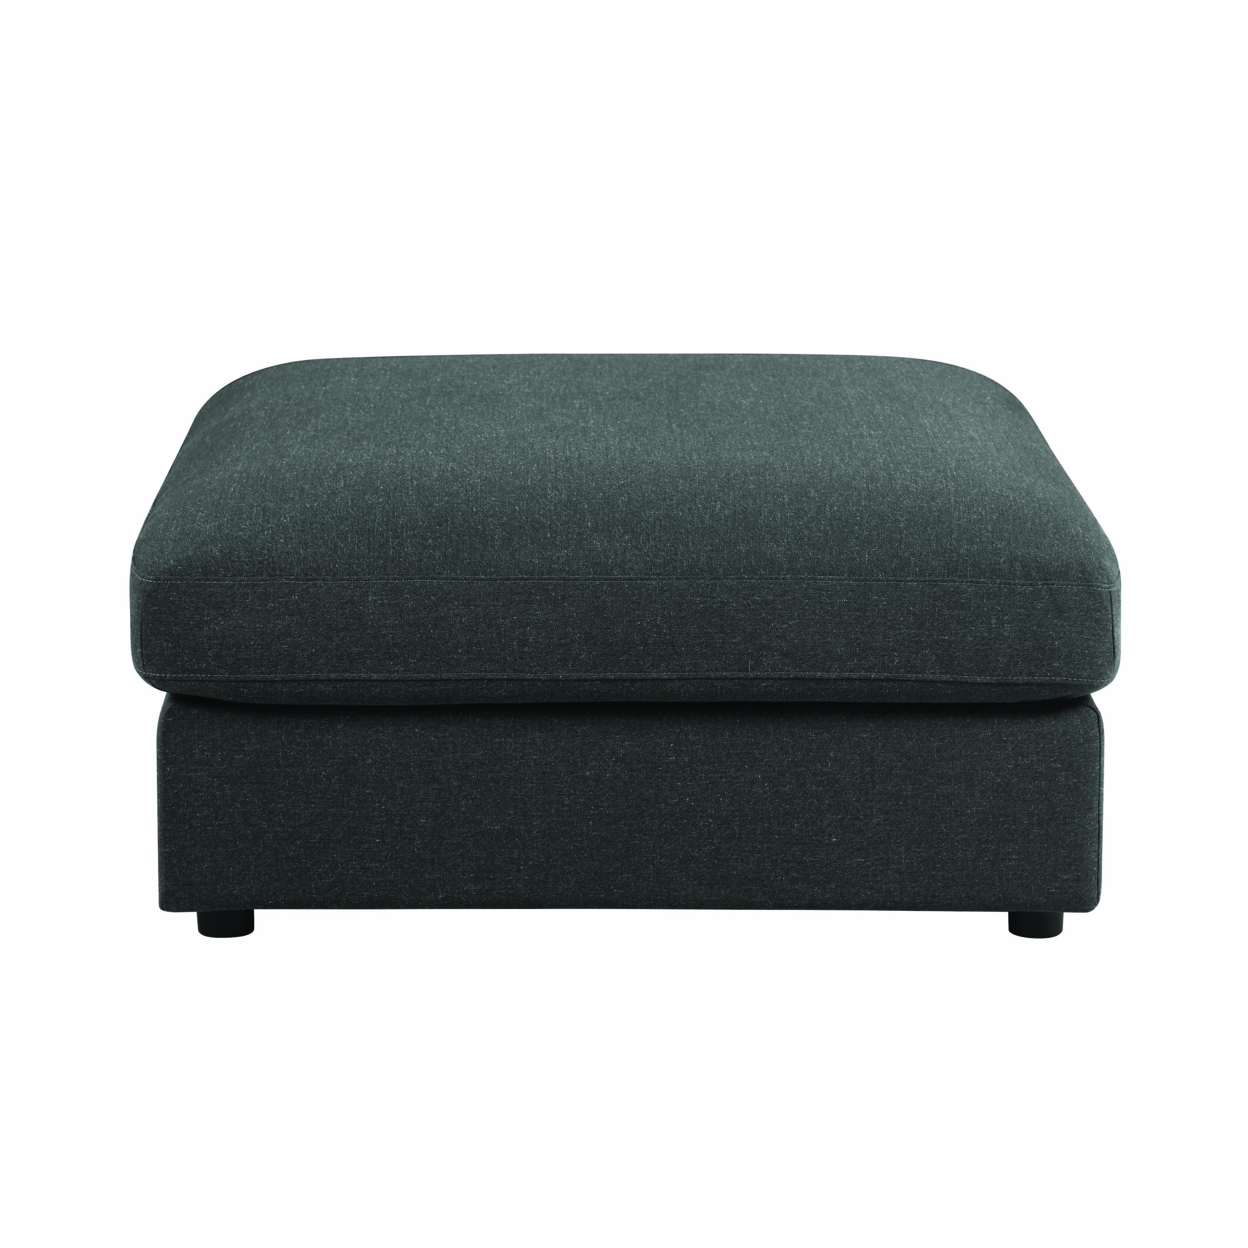 Fabric Upholstered Wooden Ottoman With Loose Cushion Seat And Small Feet, Dark Gray- Saltoro Sherpi